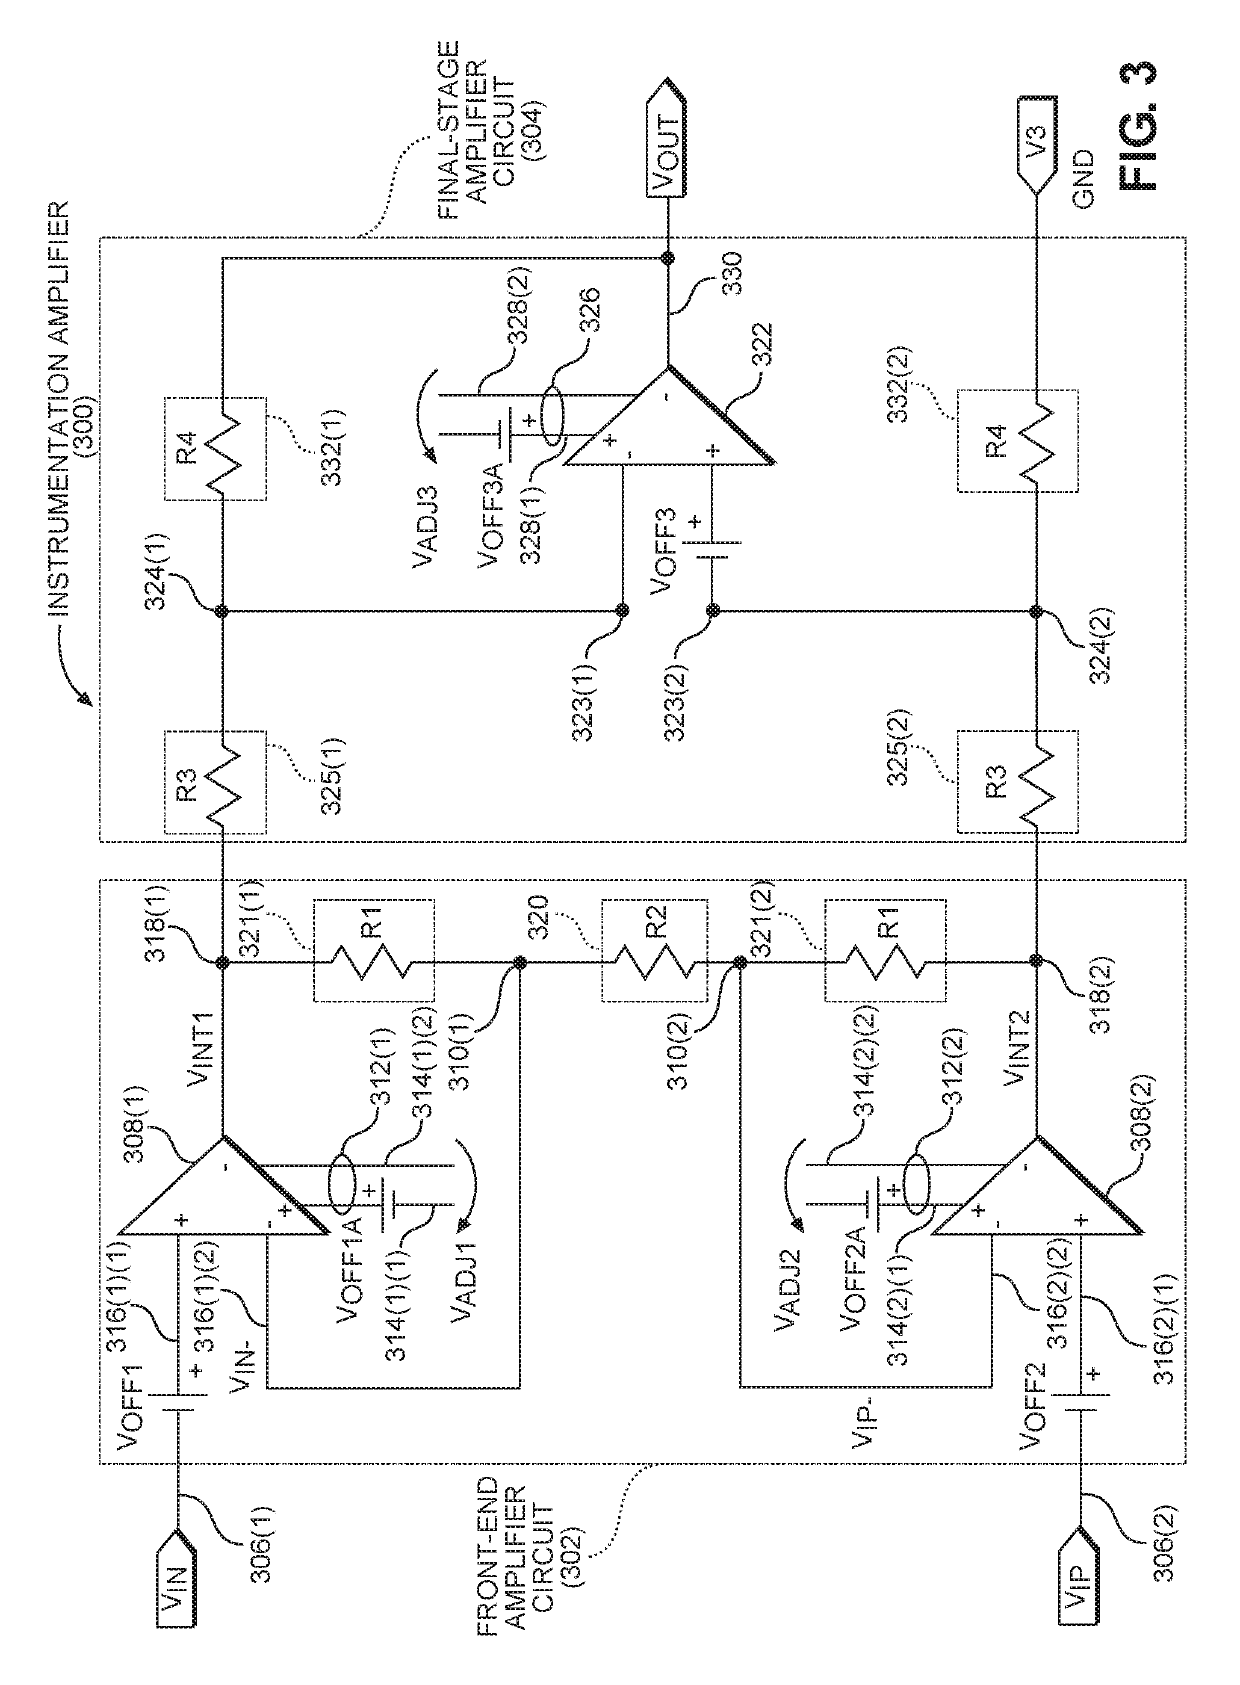 Single controller automatic calibrating circuits for reducing or canceling offset voltages in operational amplifiers in an instrumentation amplifier